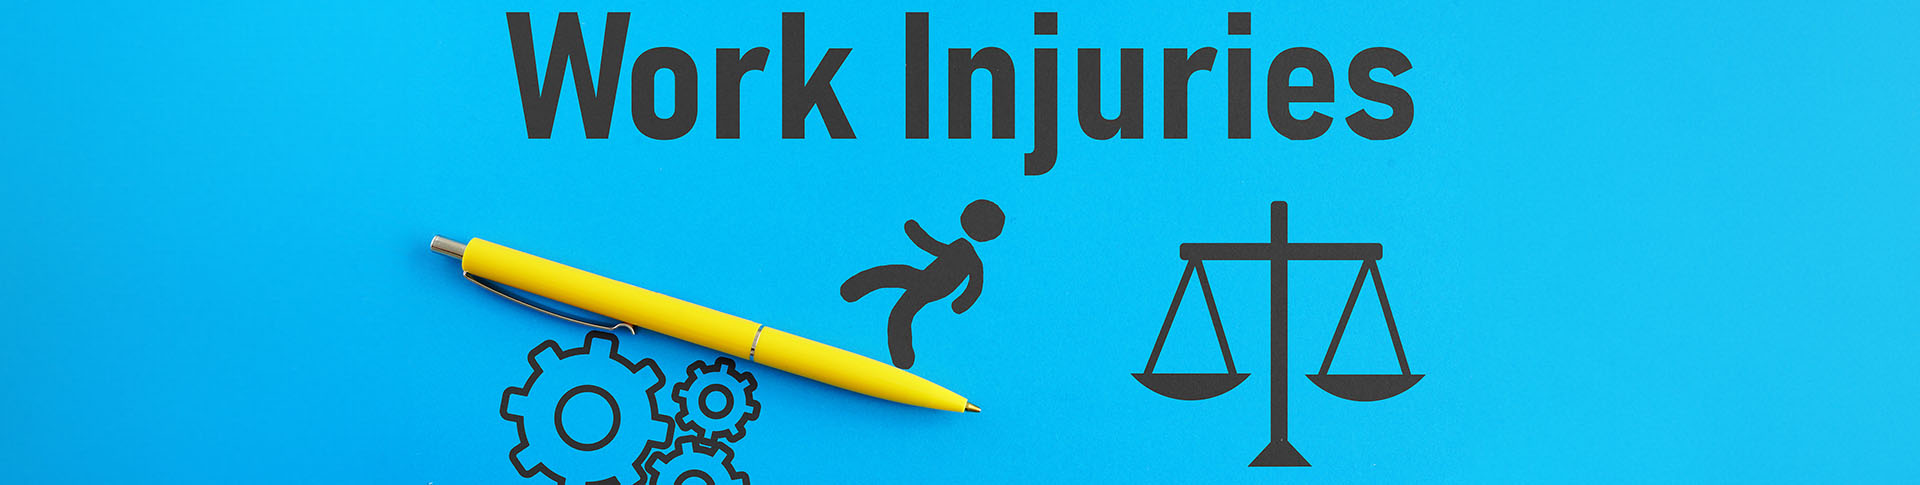 Work injuries and workers’ comp doctors.